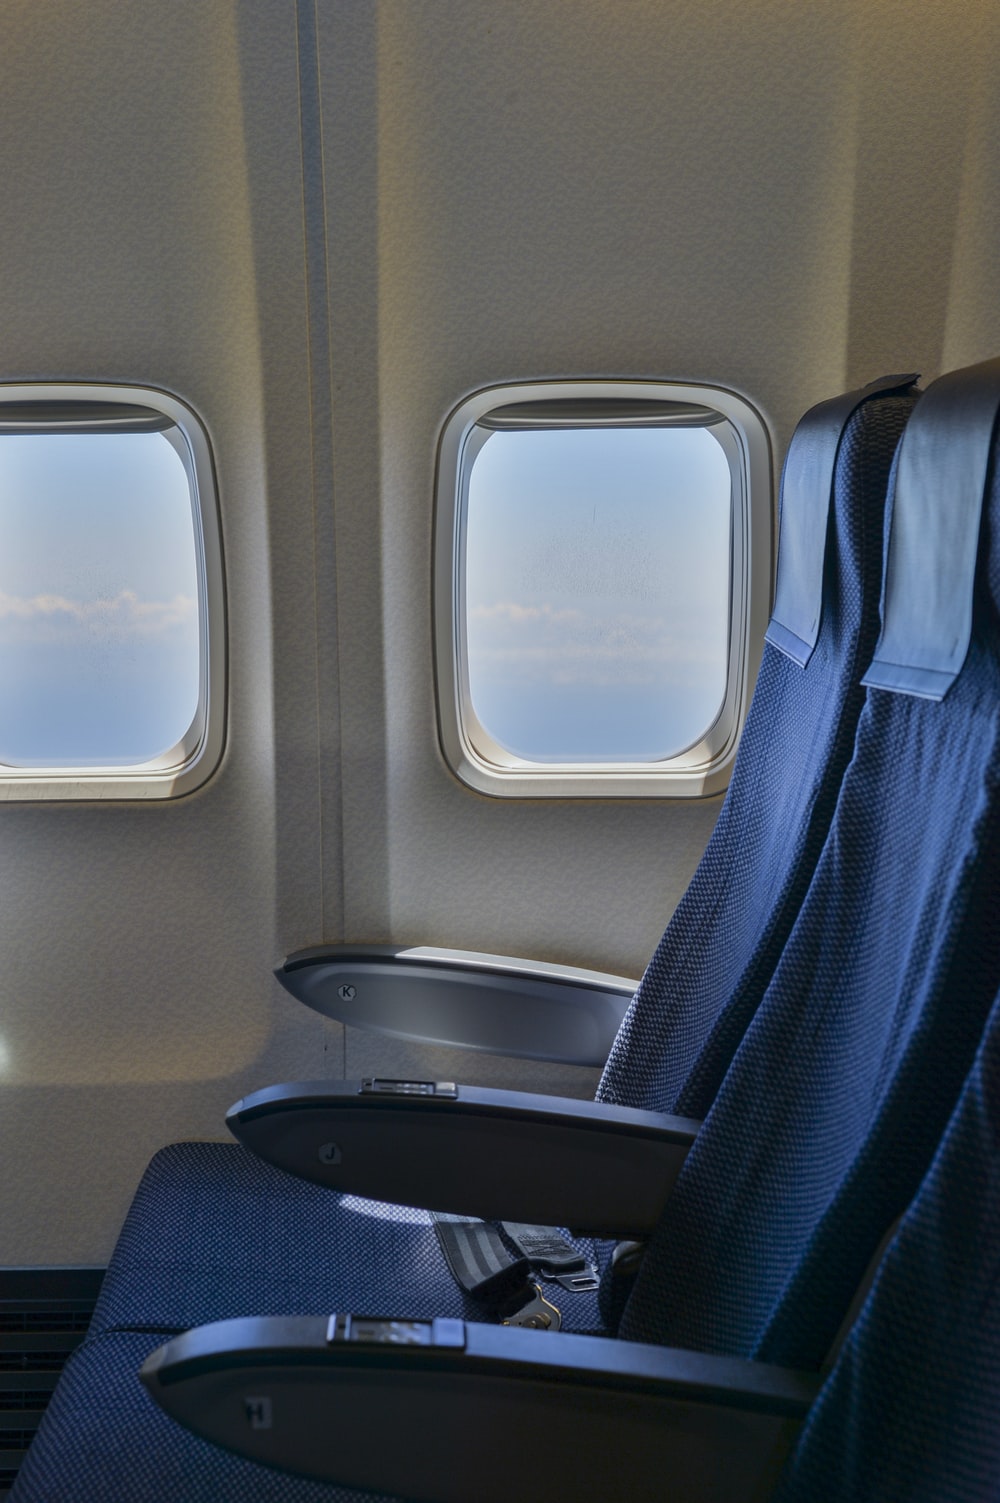 Airplane Seat Pictures Image